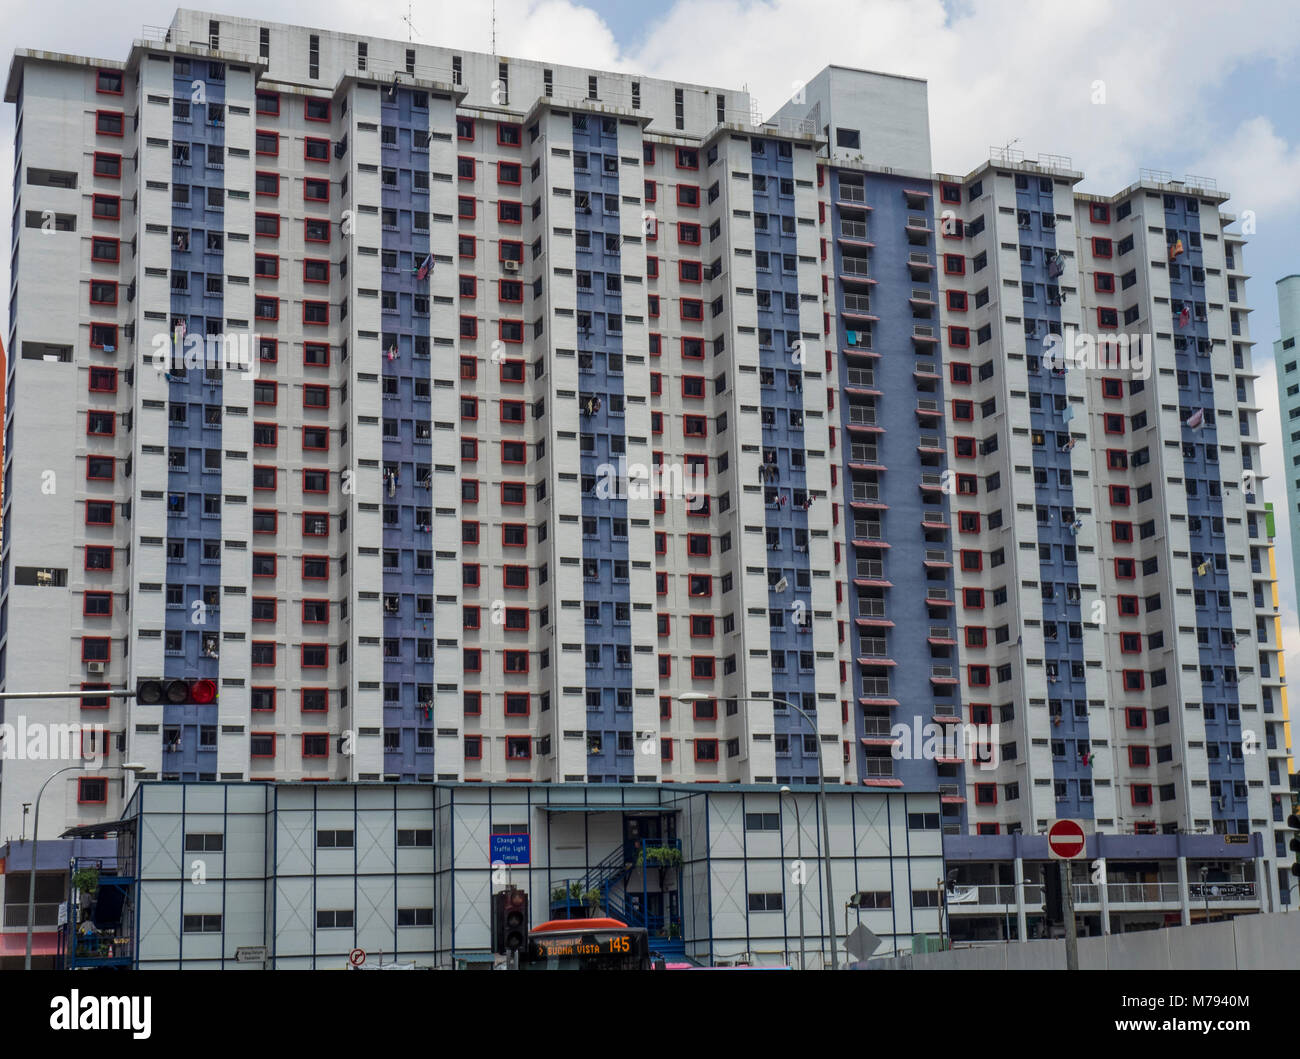 high-density-living-a-high-rise-block-of-residential-apartments-in-M7940M.jpg